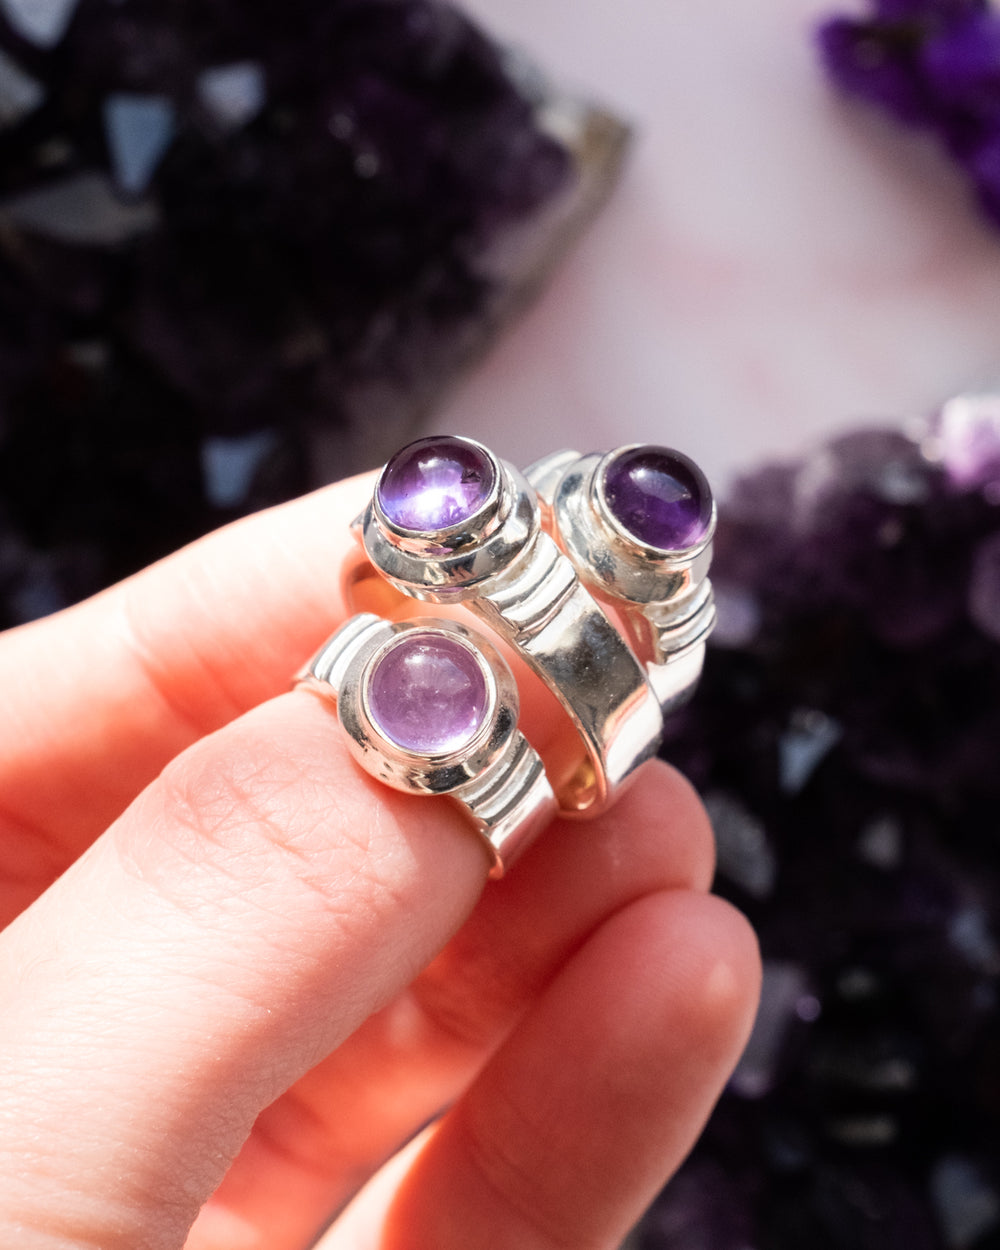 Amethyst Ring in Sterling Silver - The Healing Pear